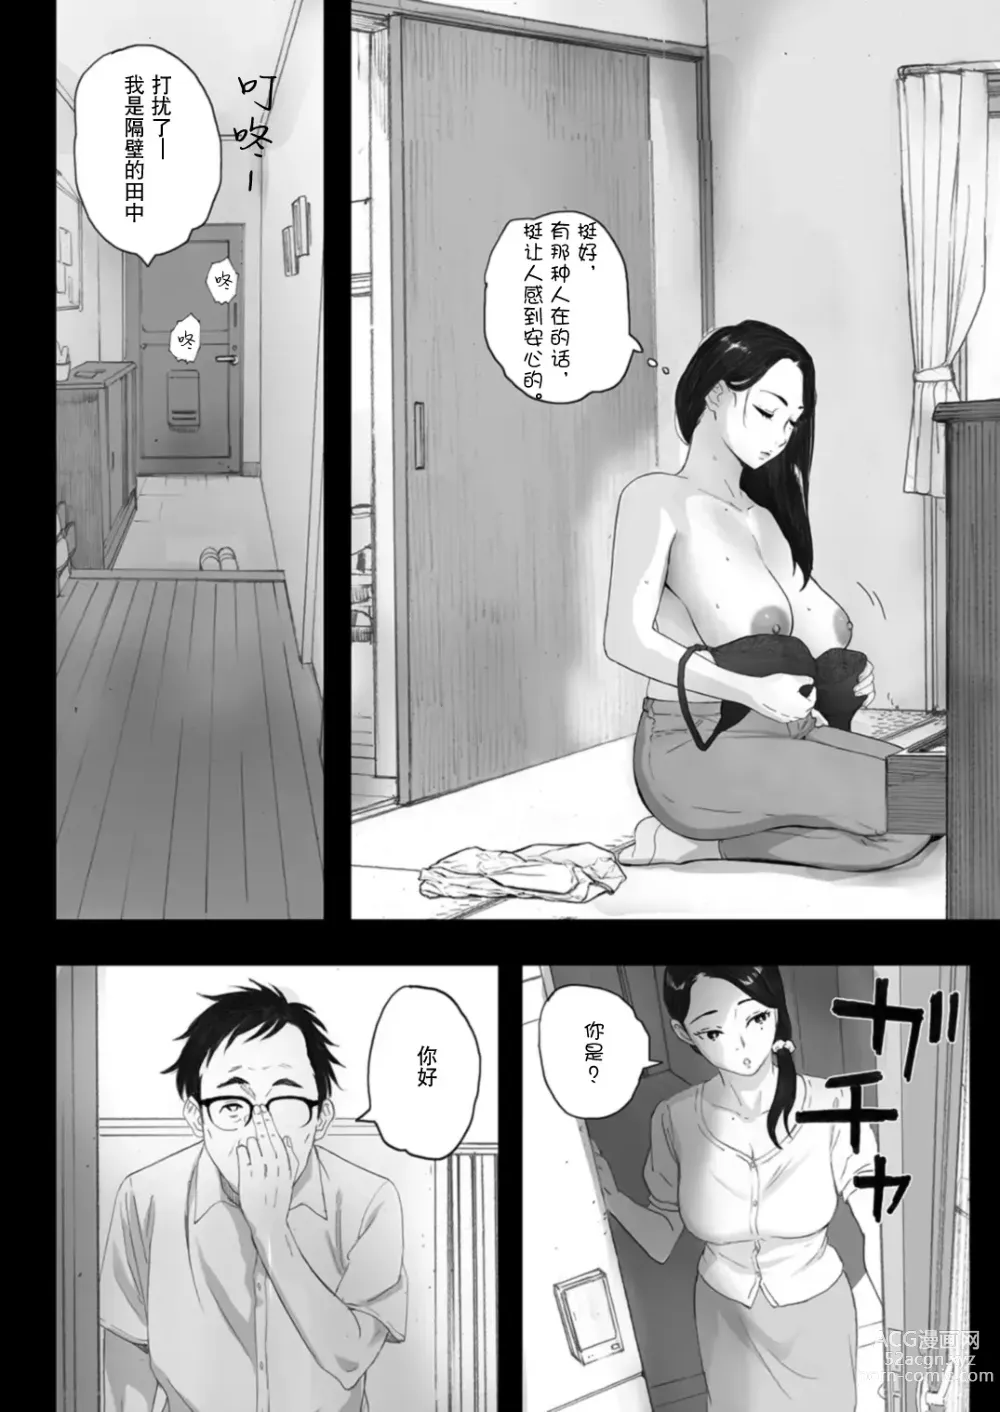 Page 9 of doujinshi 706 rooms